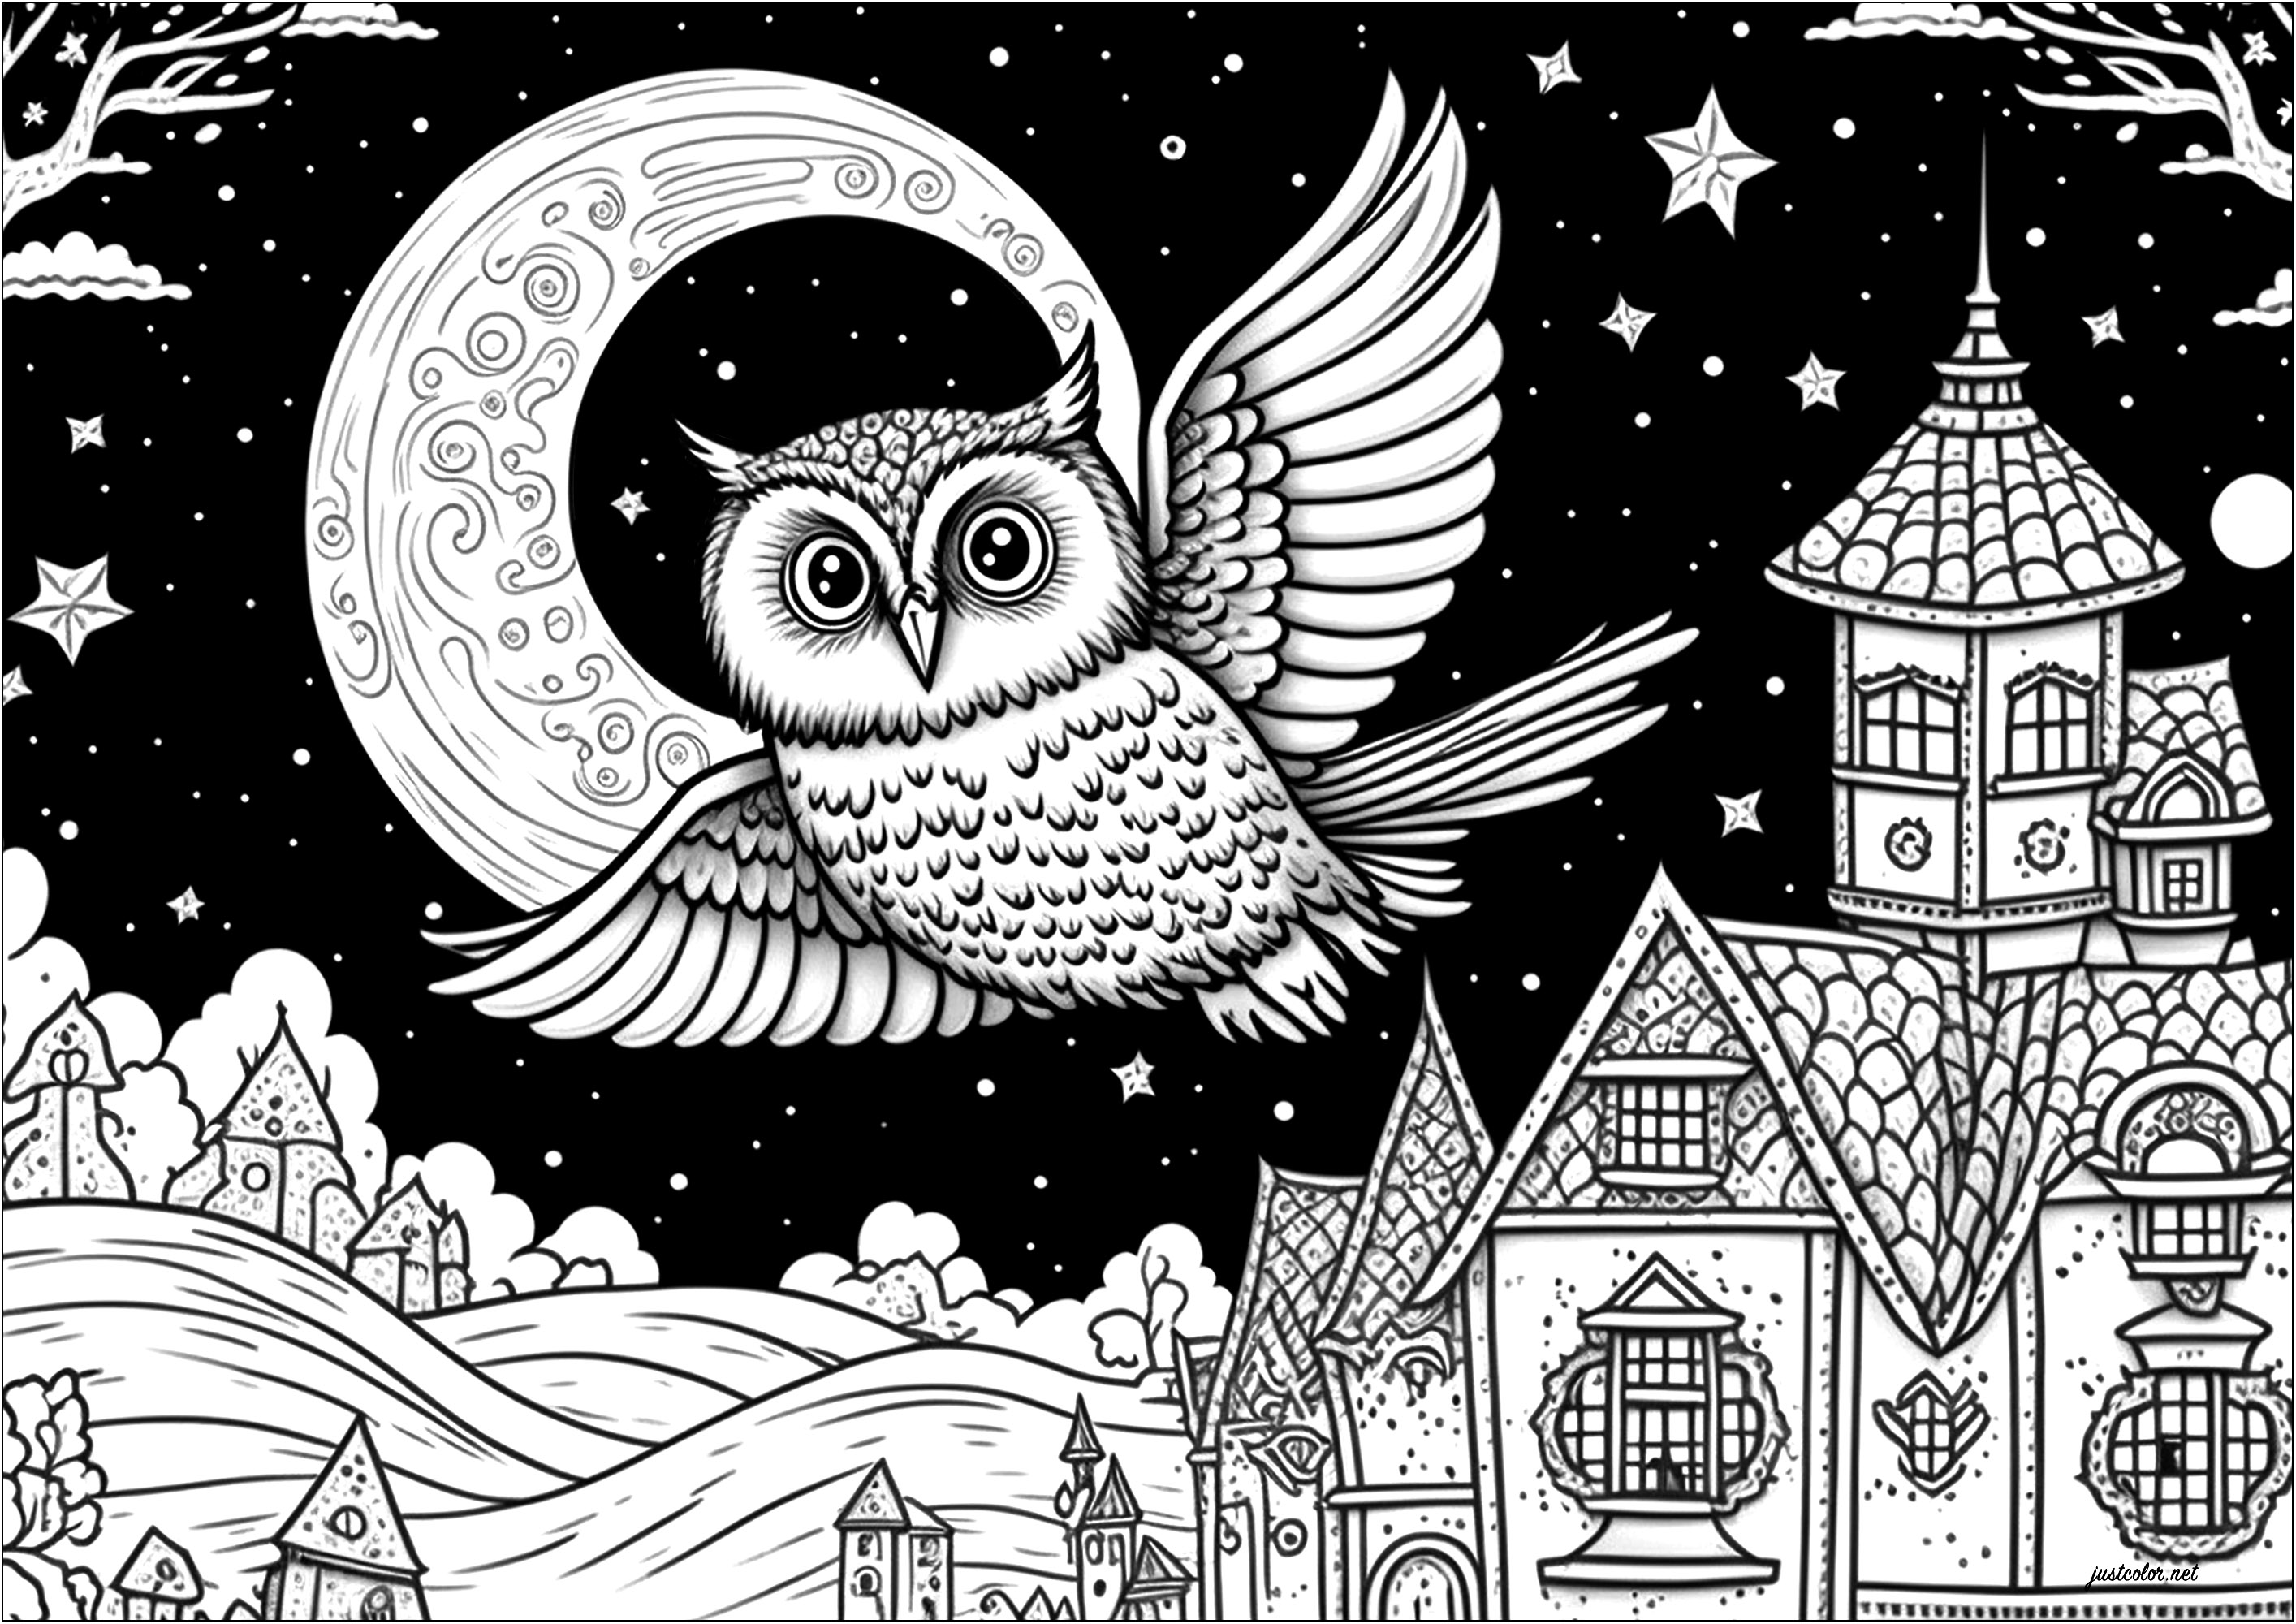 Coloring of an owl during a starry night with full moon. This coloring page is a real invitation to magic and poetry.It's up to you to color this owl flying over this beautiful village and letting the soft moonlight lull him to sleep.